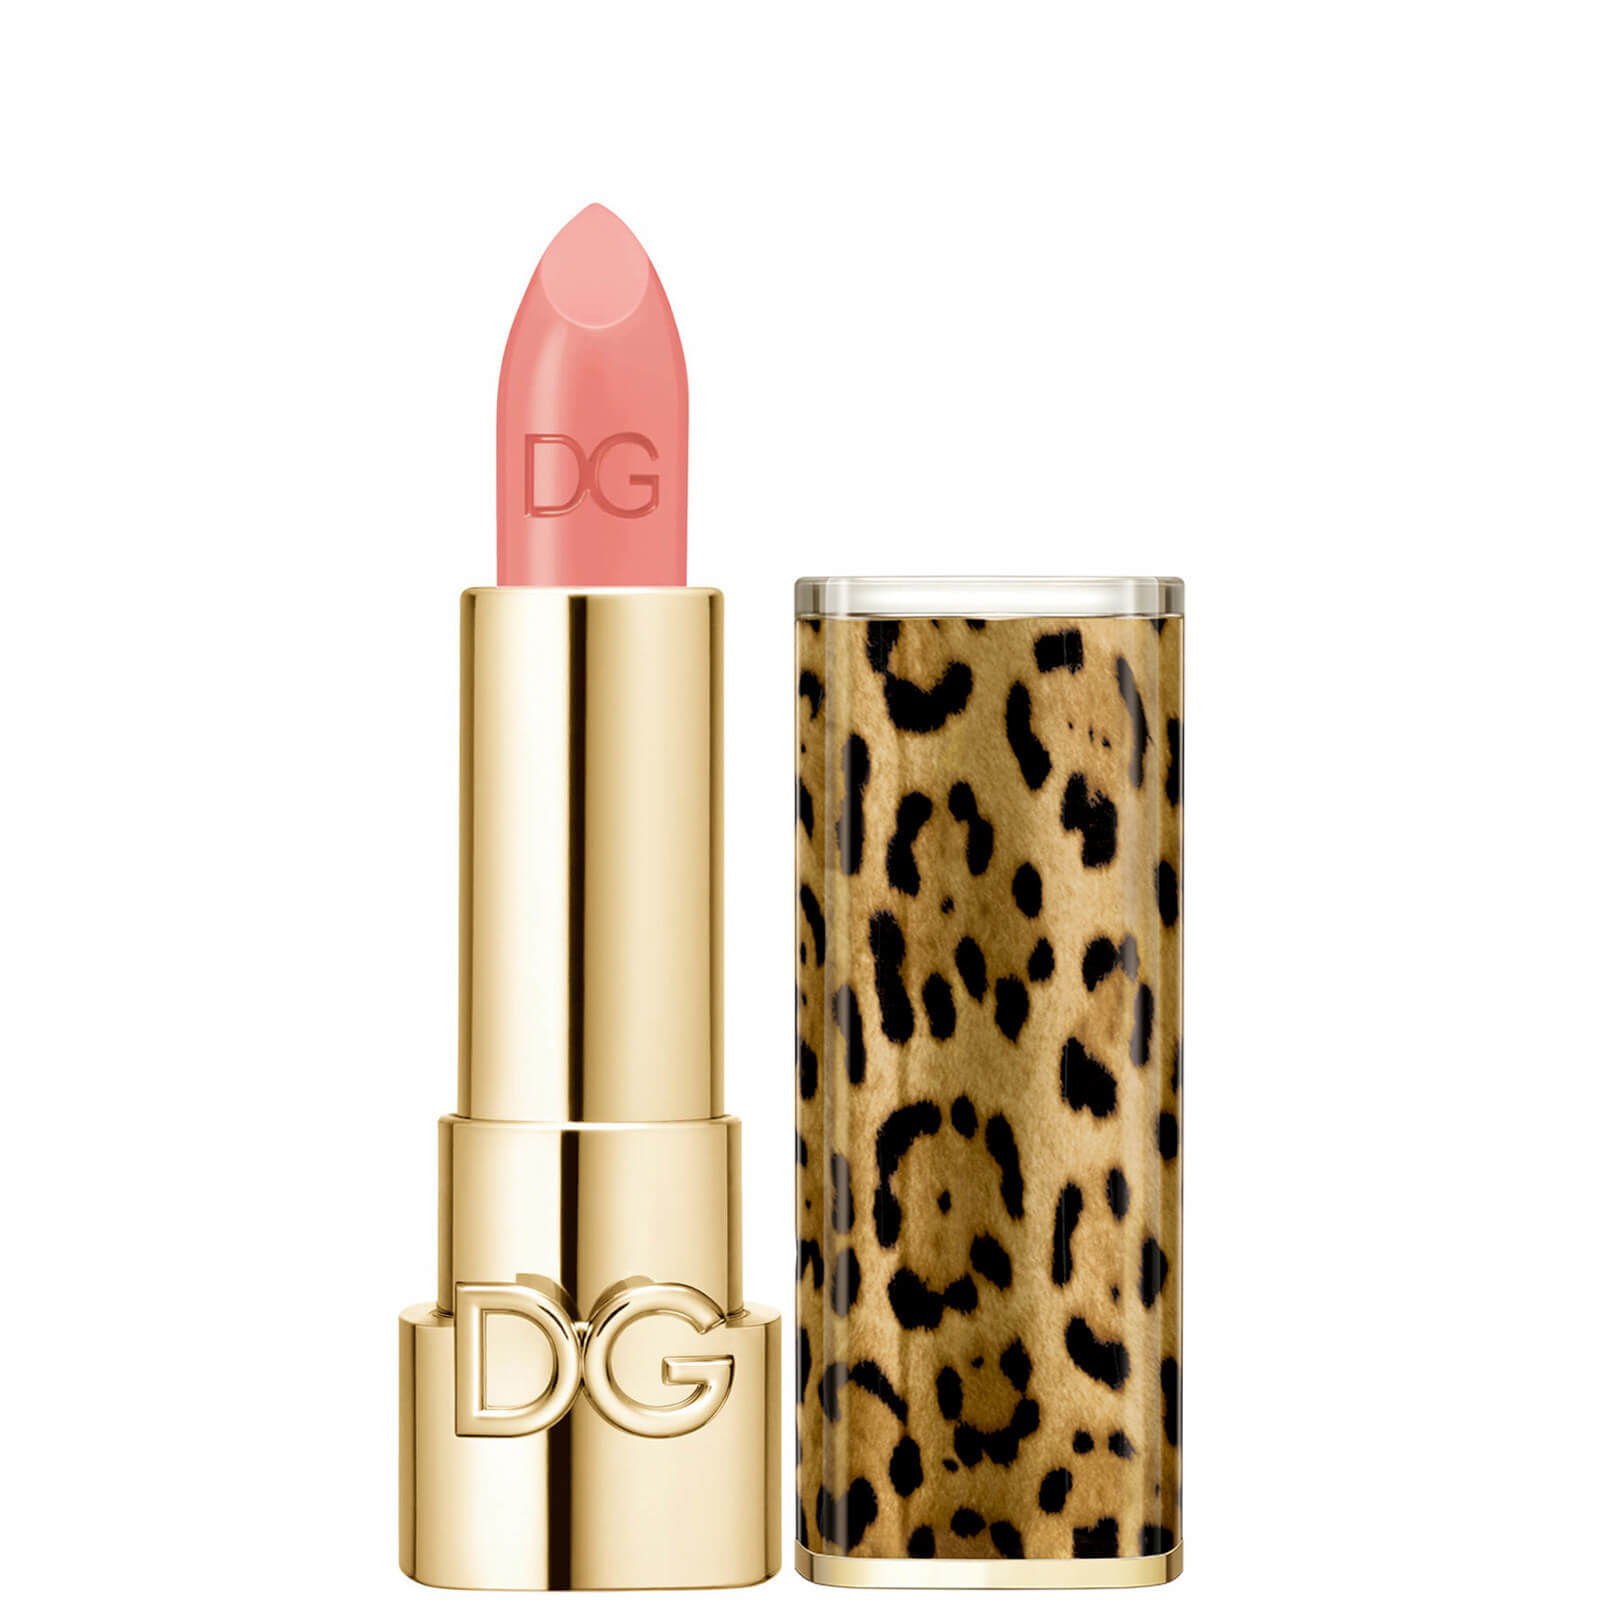 Dolce&Gabbana The Only One Lipstick + Cap (Animalier) (Various Shades) - 200 Angelic Pink